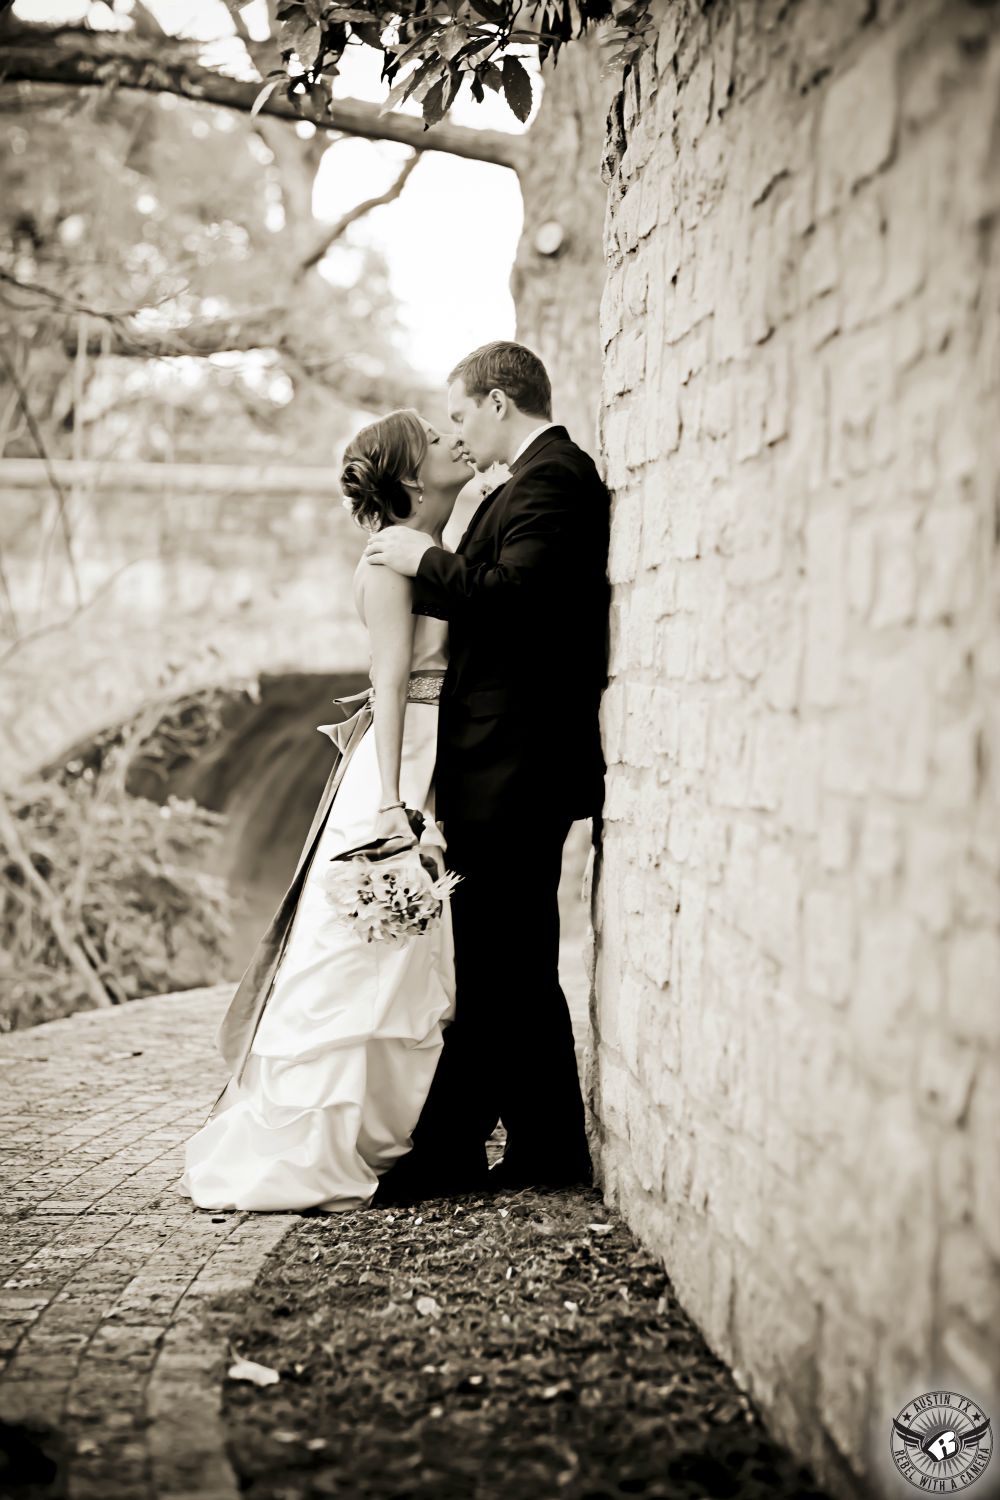 Sepia toned image of groom kissing bride in ruffled strapless wedding gown as he leans against high stone wall at the Etter-Harbin Alumni Center wedding venue on the University of Texas campus.